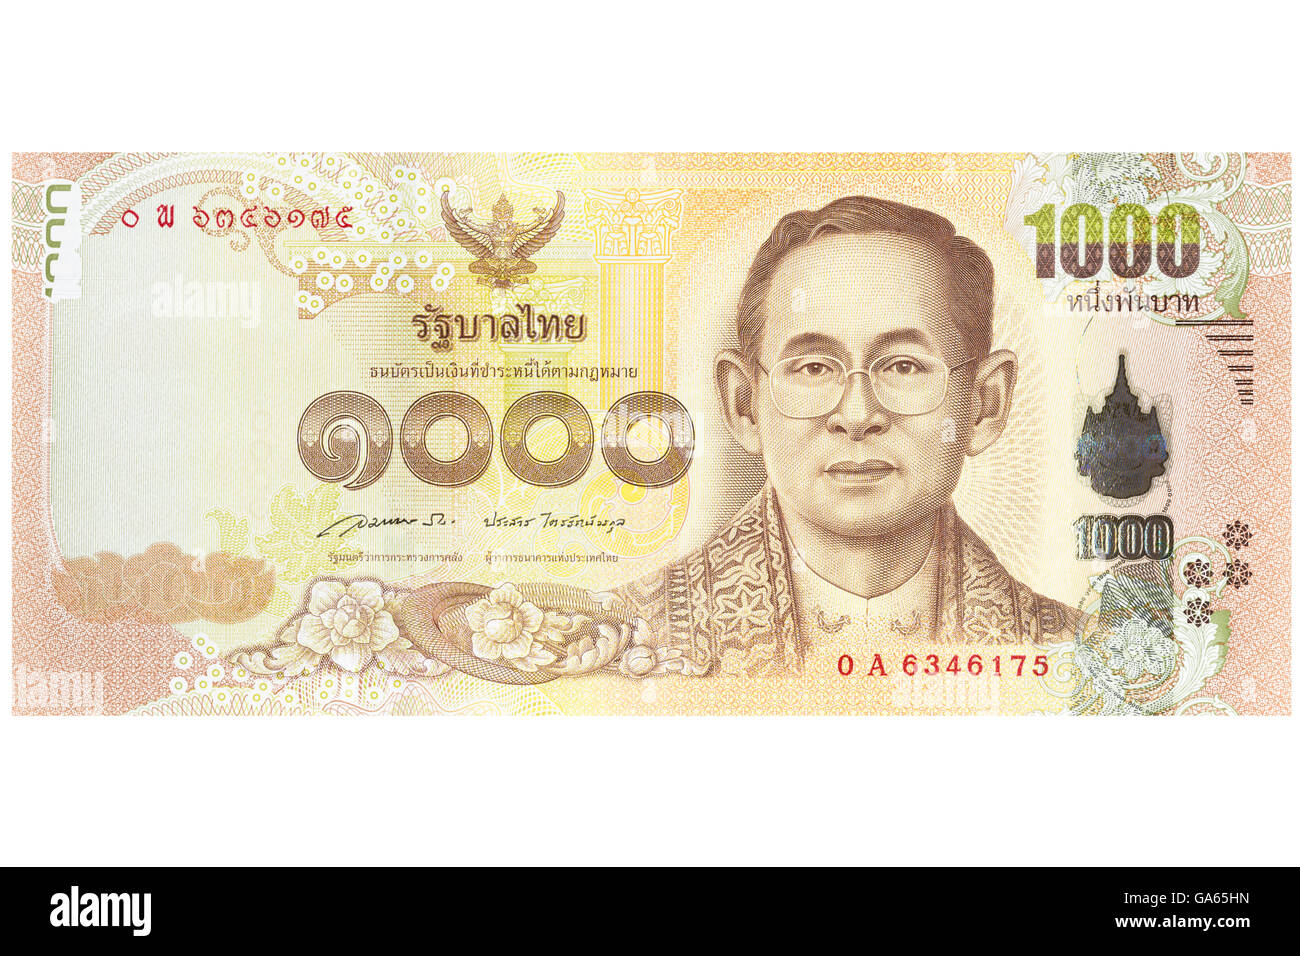 One thousand thai Baht note note on a white background Stock Photo